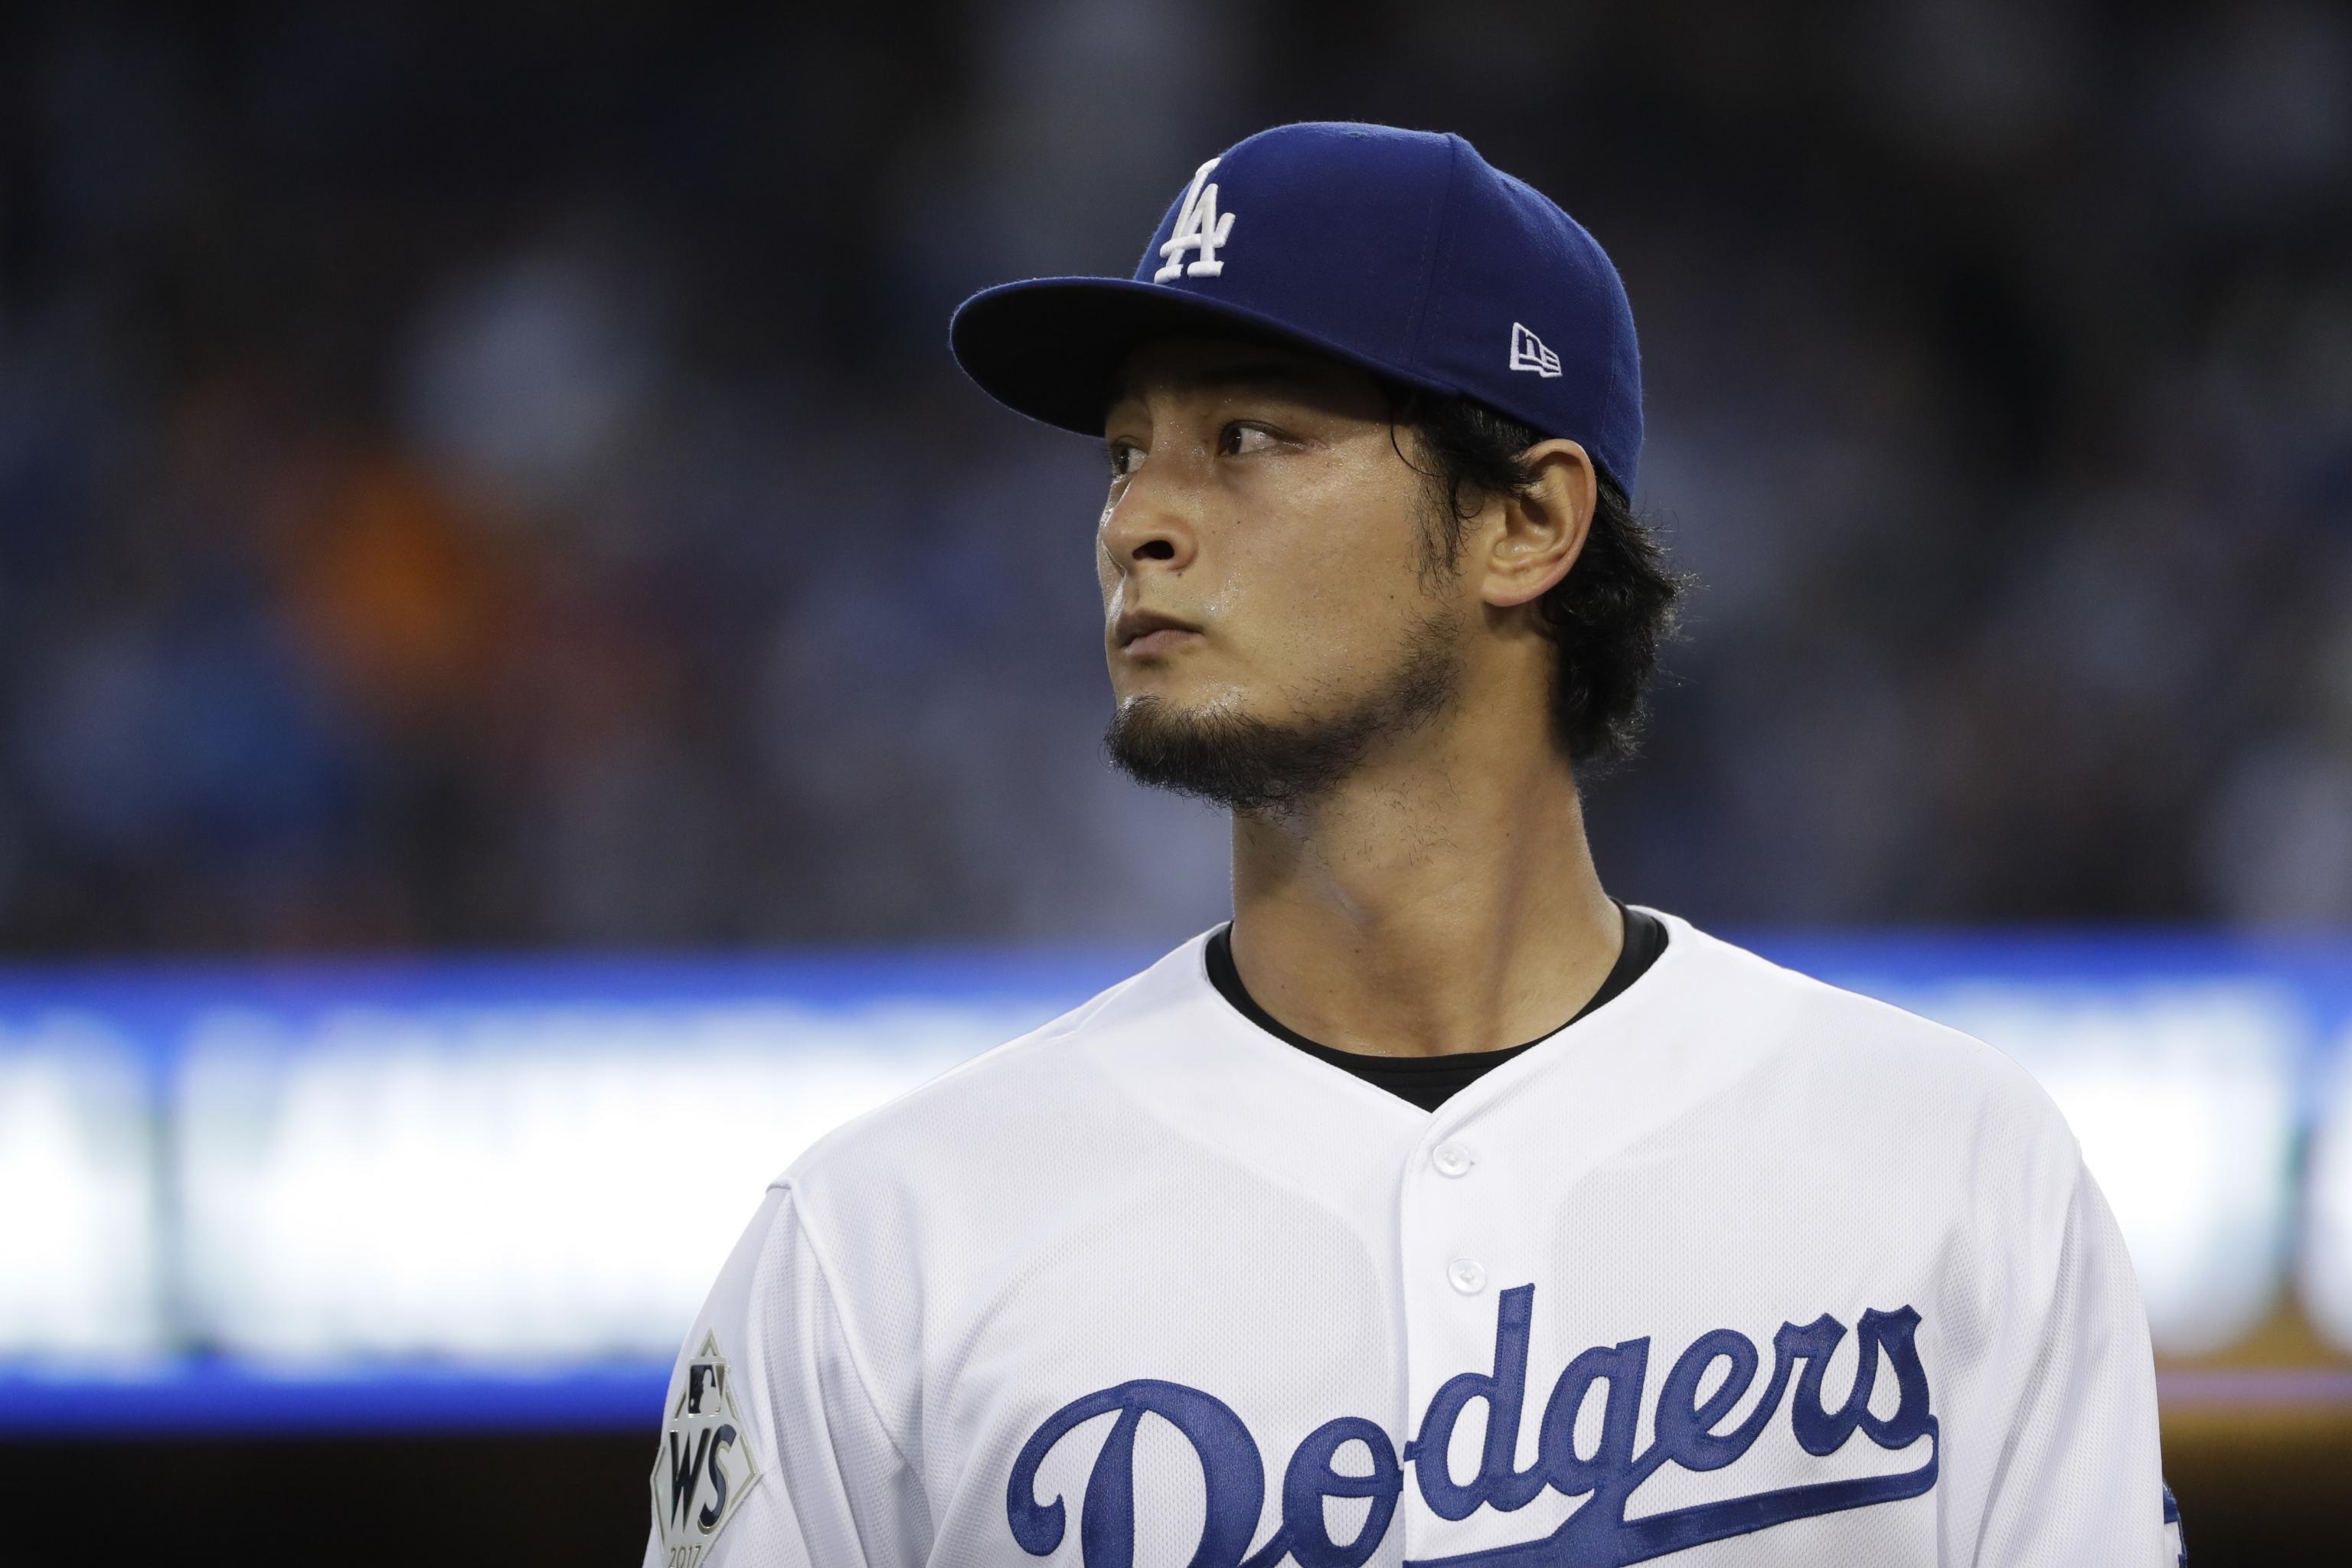 Yu Darvish to miss 2015 season after opting for Tommy John surgery, MLB